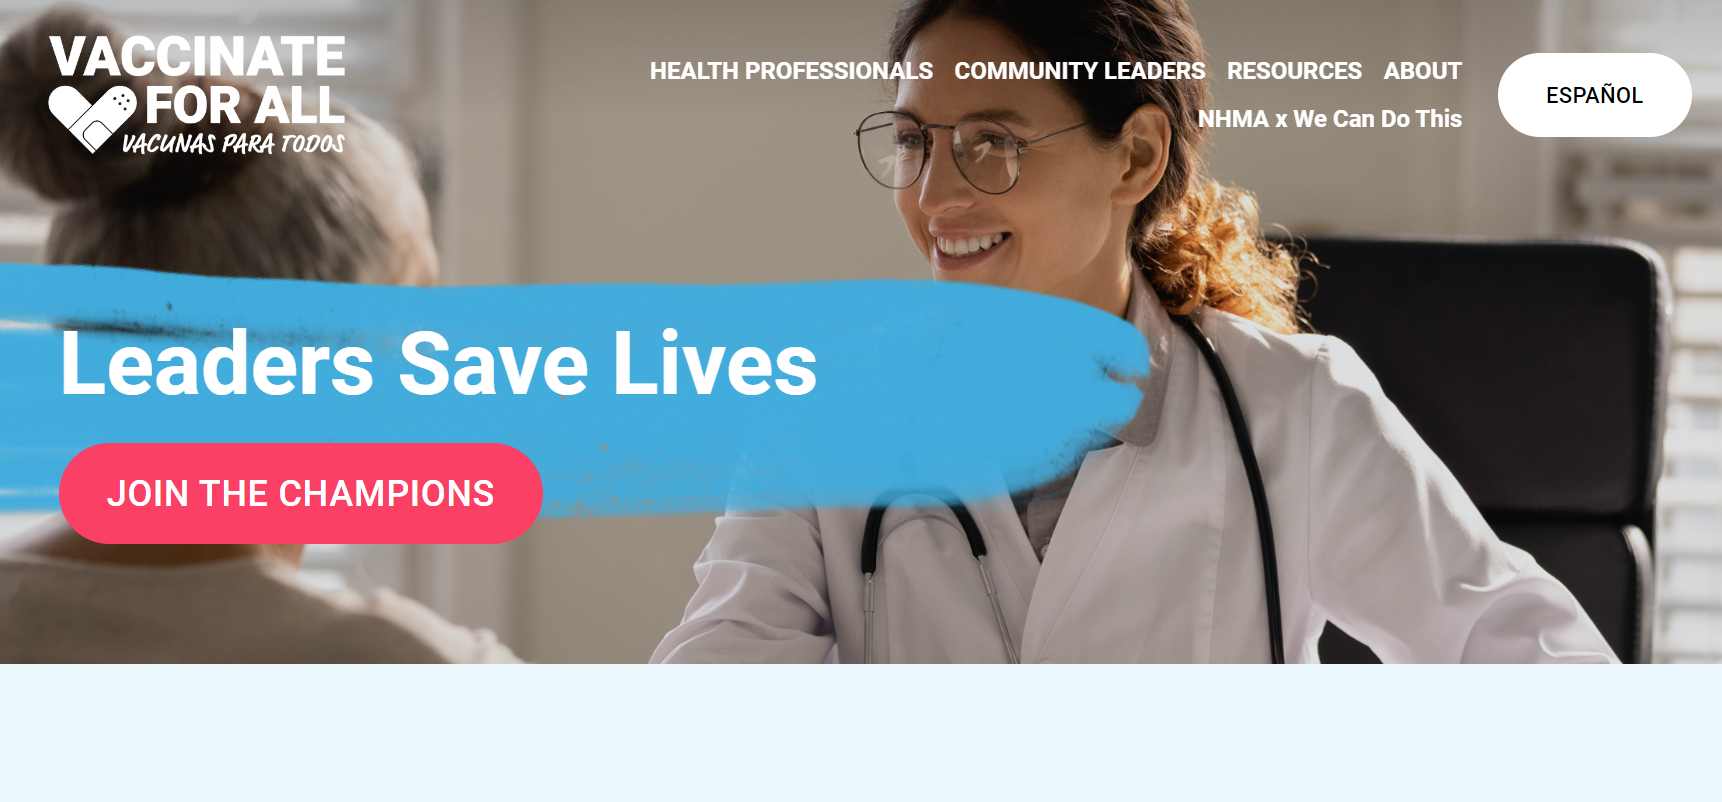 Website includes an image of a doctor speaking with a patient.